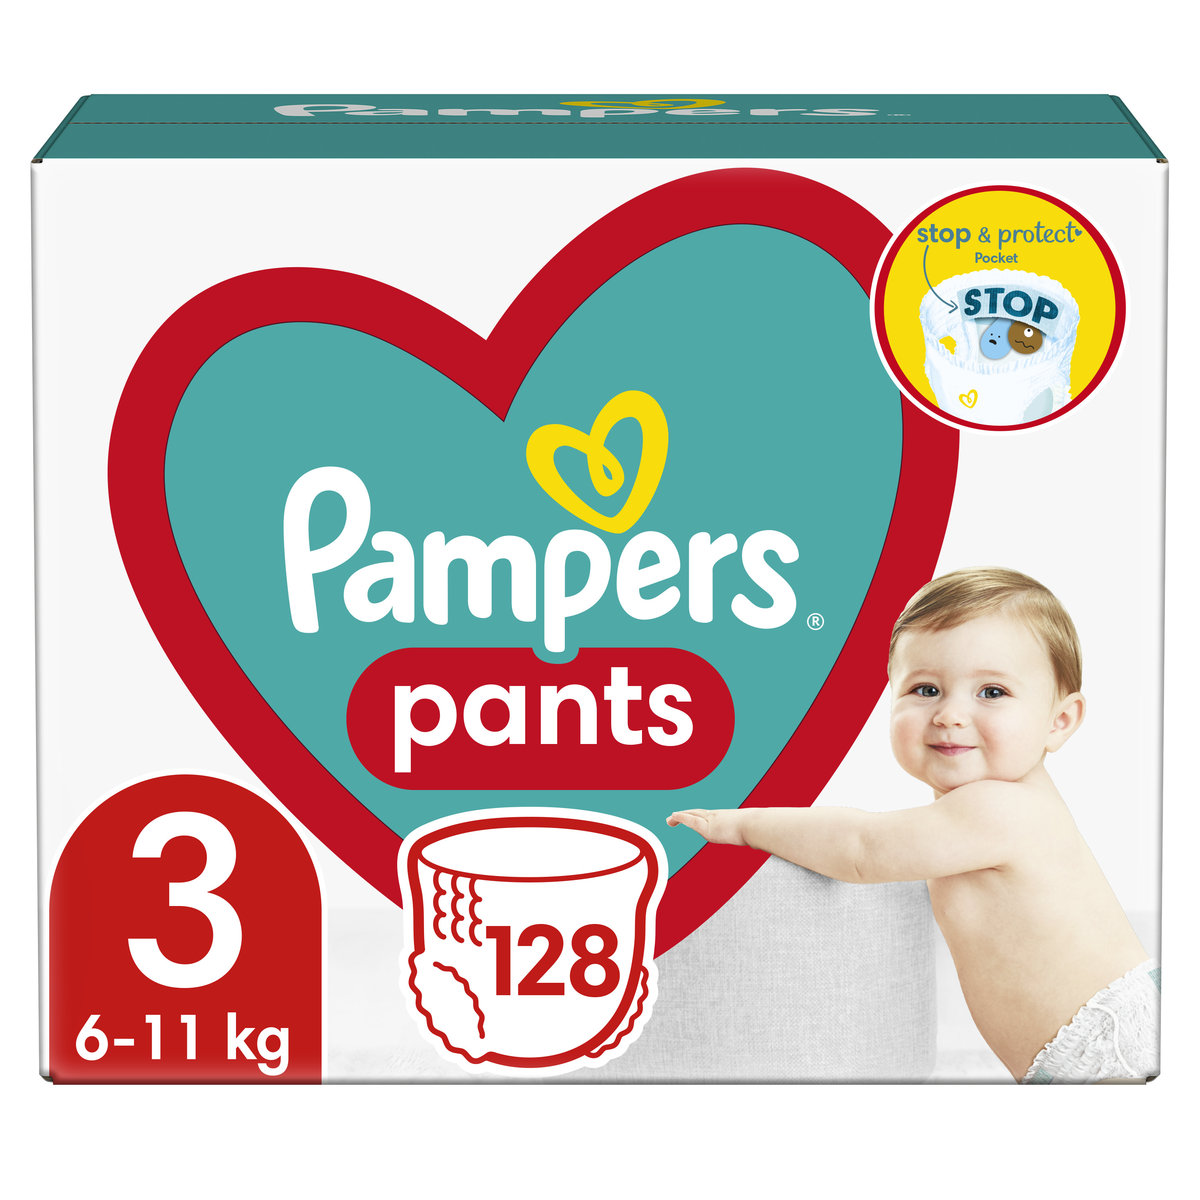 shopee pampers